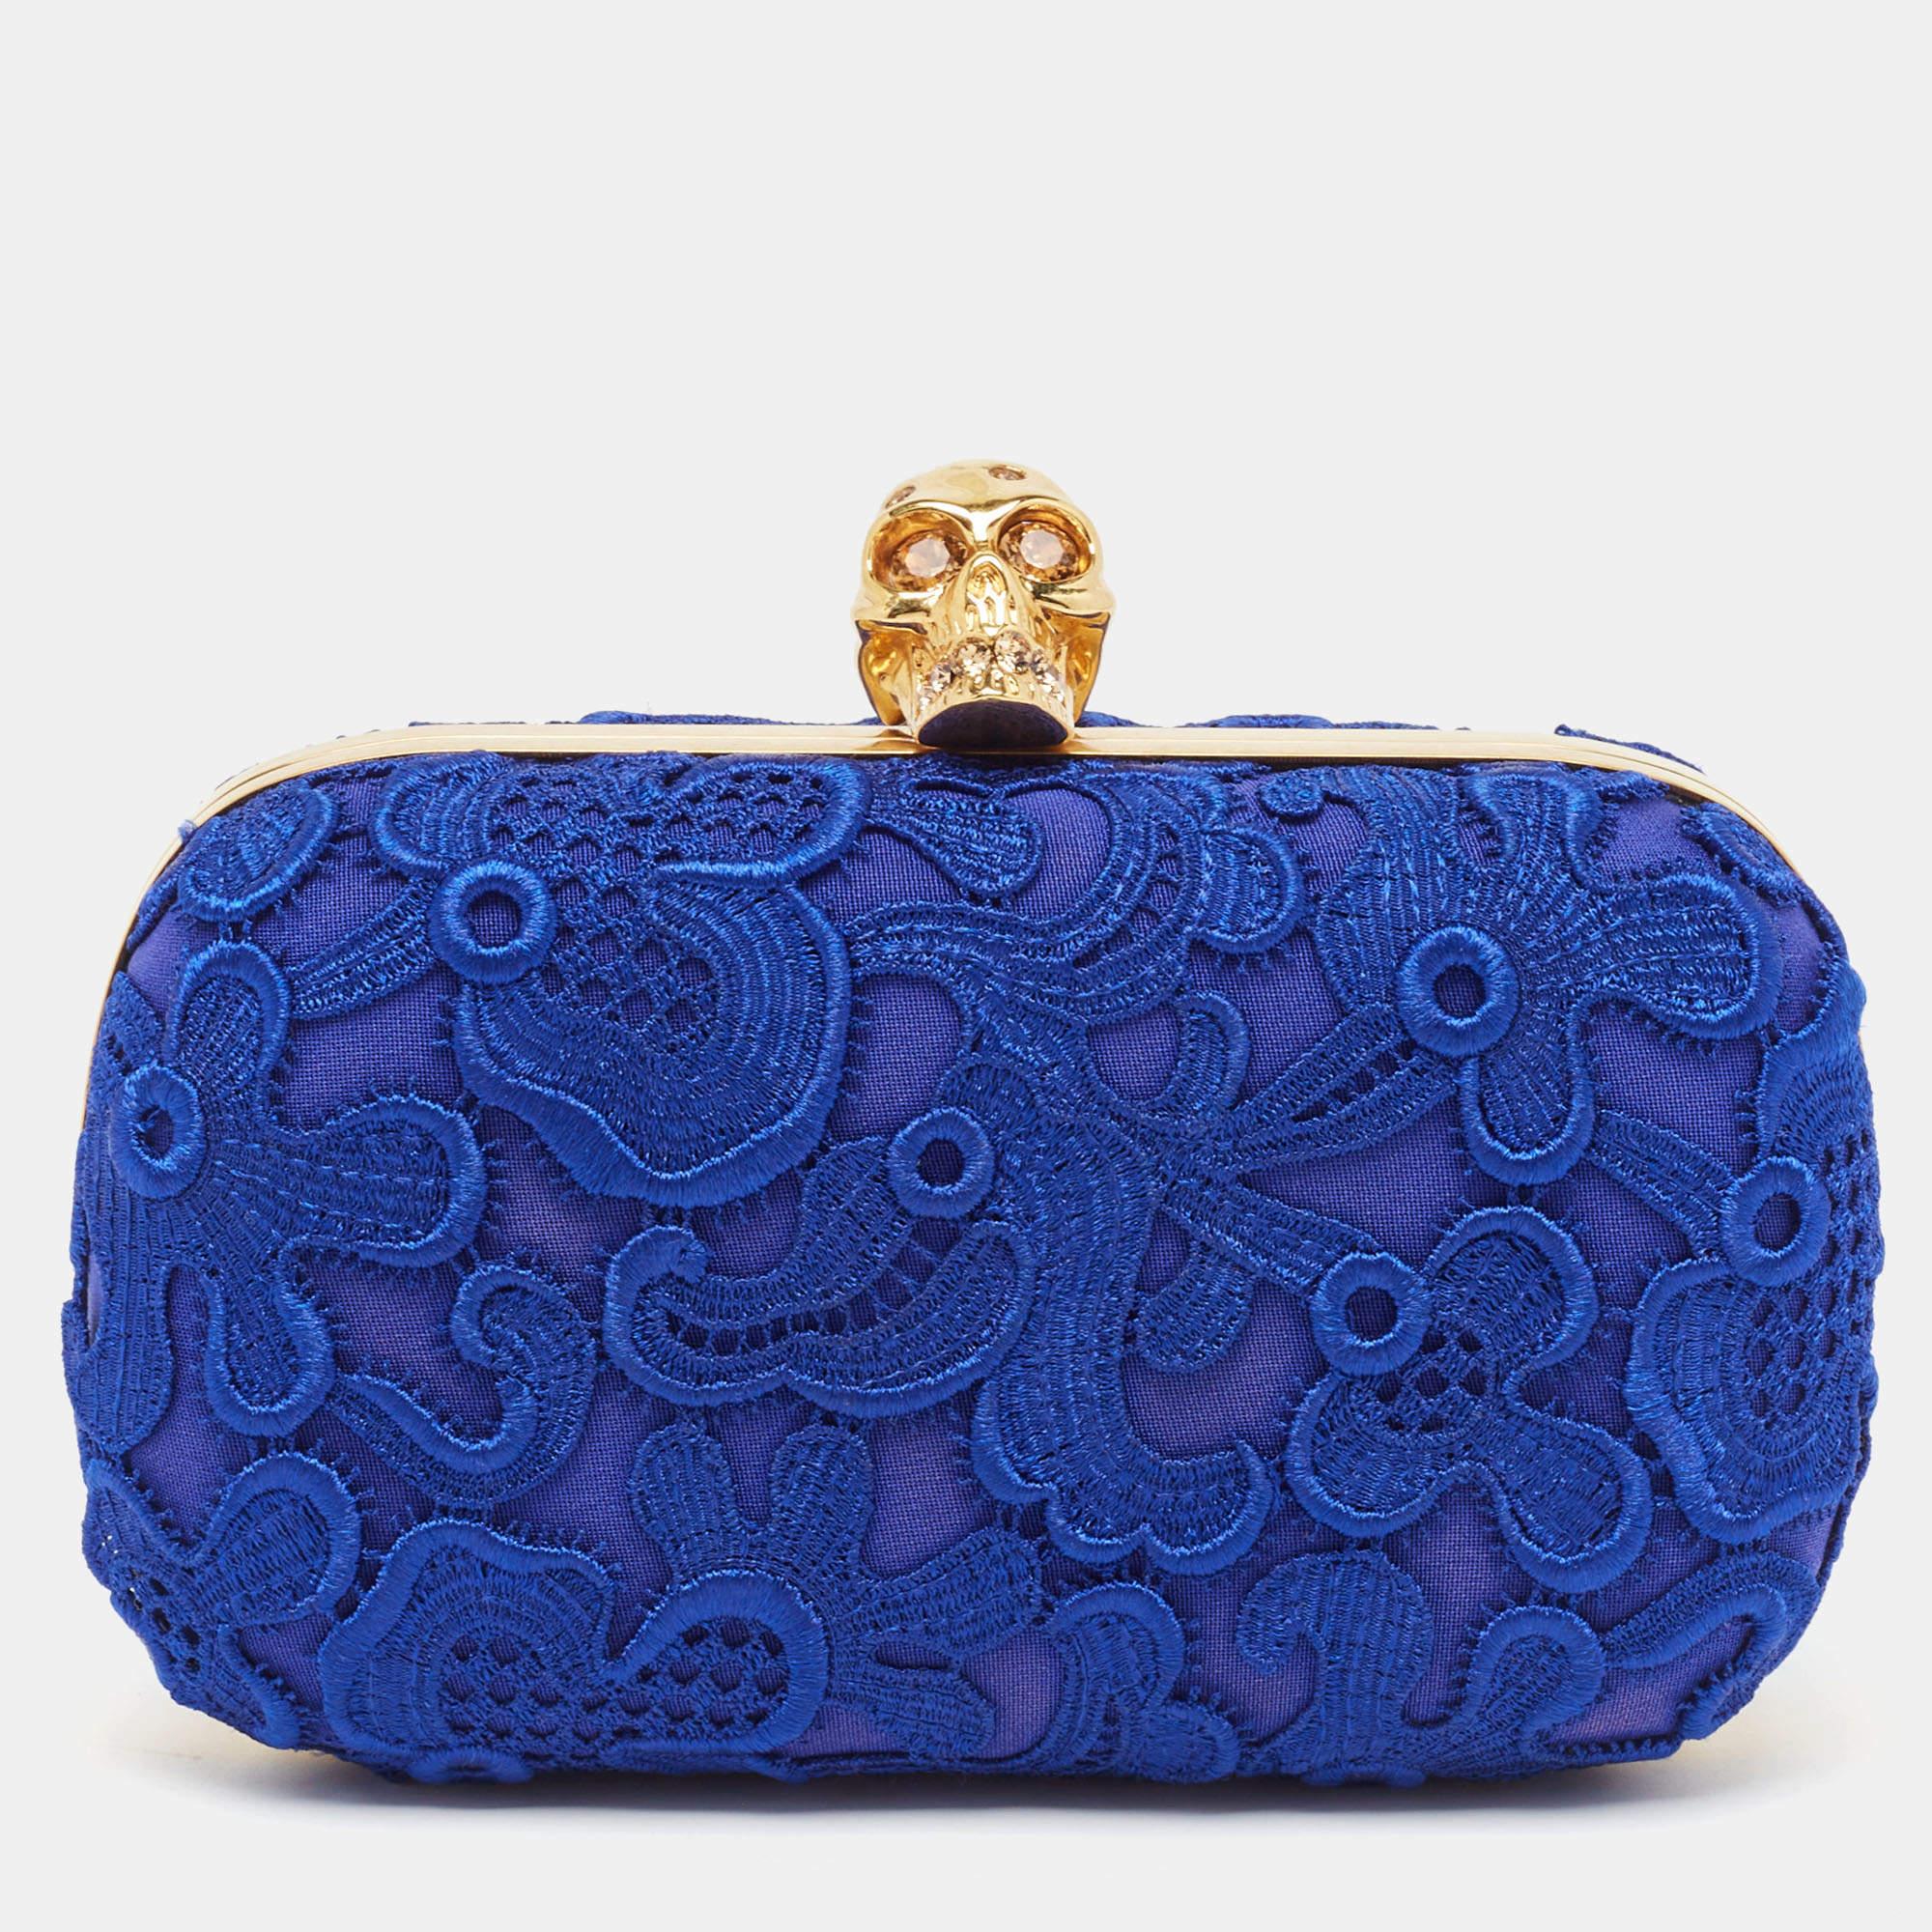 Make an inspiring appearance with this statement-making Skull Box Clutch. This Alexander McQueen creation has a structured body made of metal. It is adorned with skull clasp closure embellished with crystals. Carry this beauty to add luxury to your